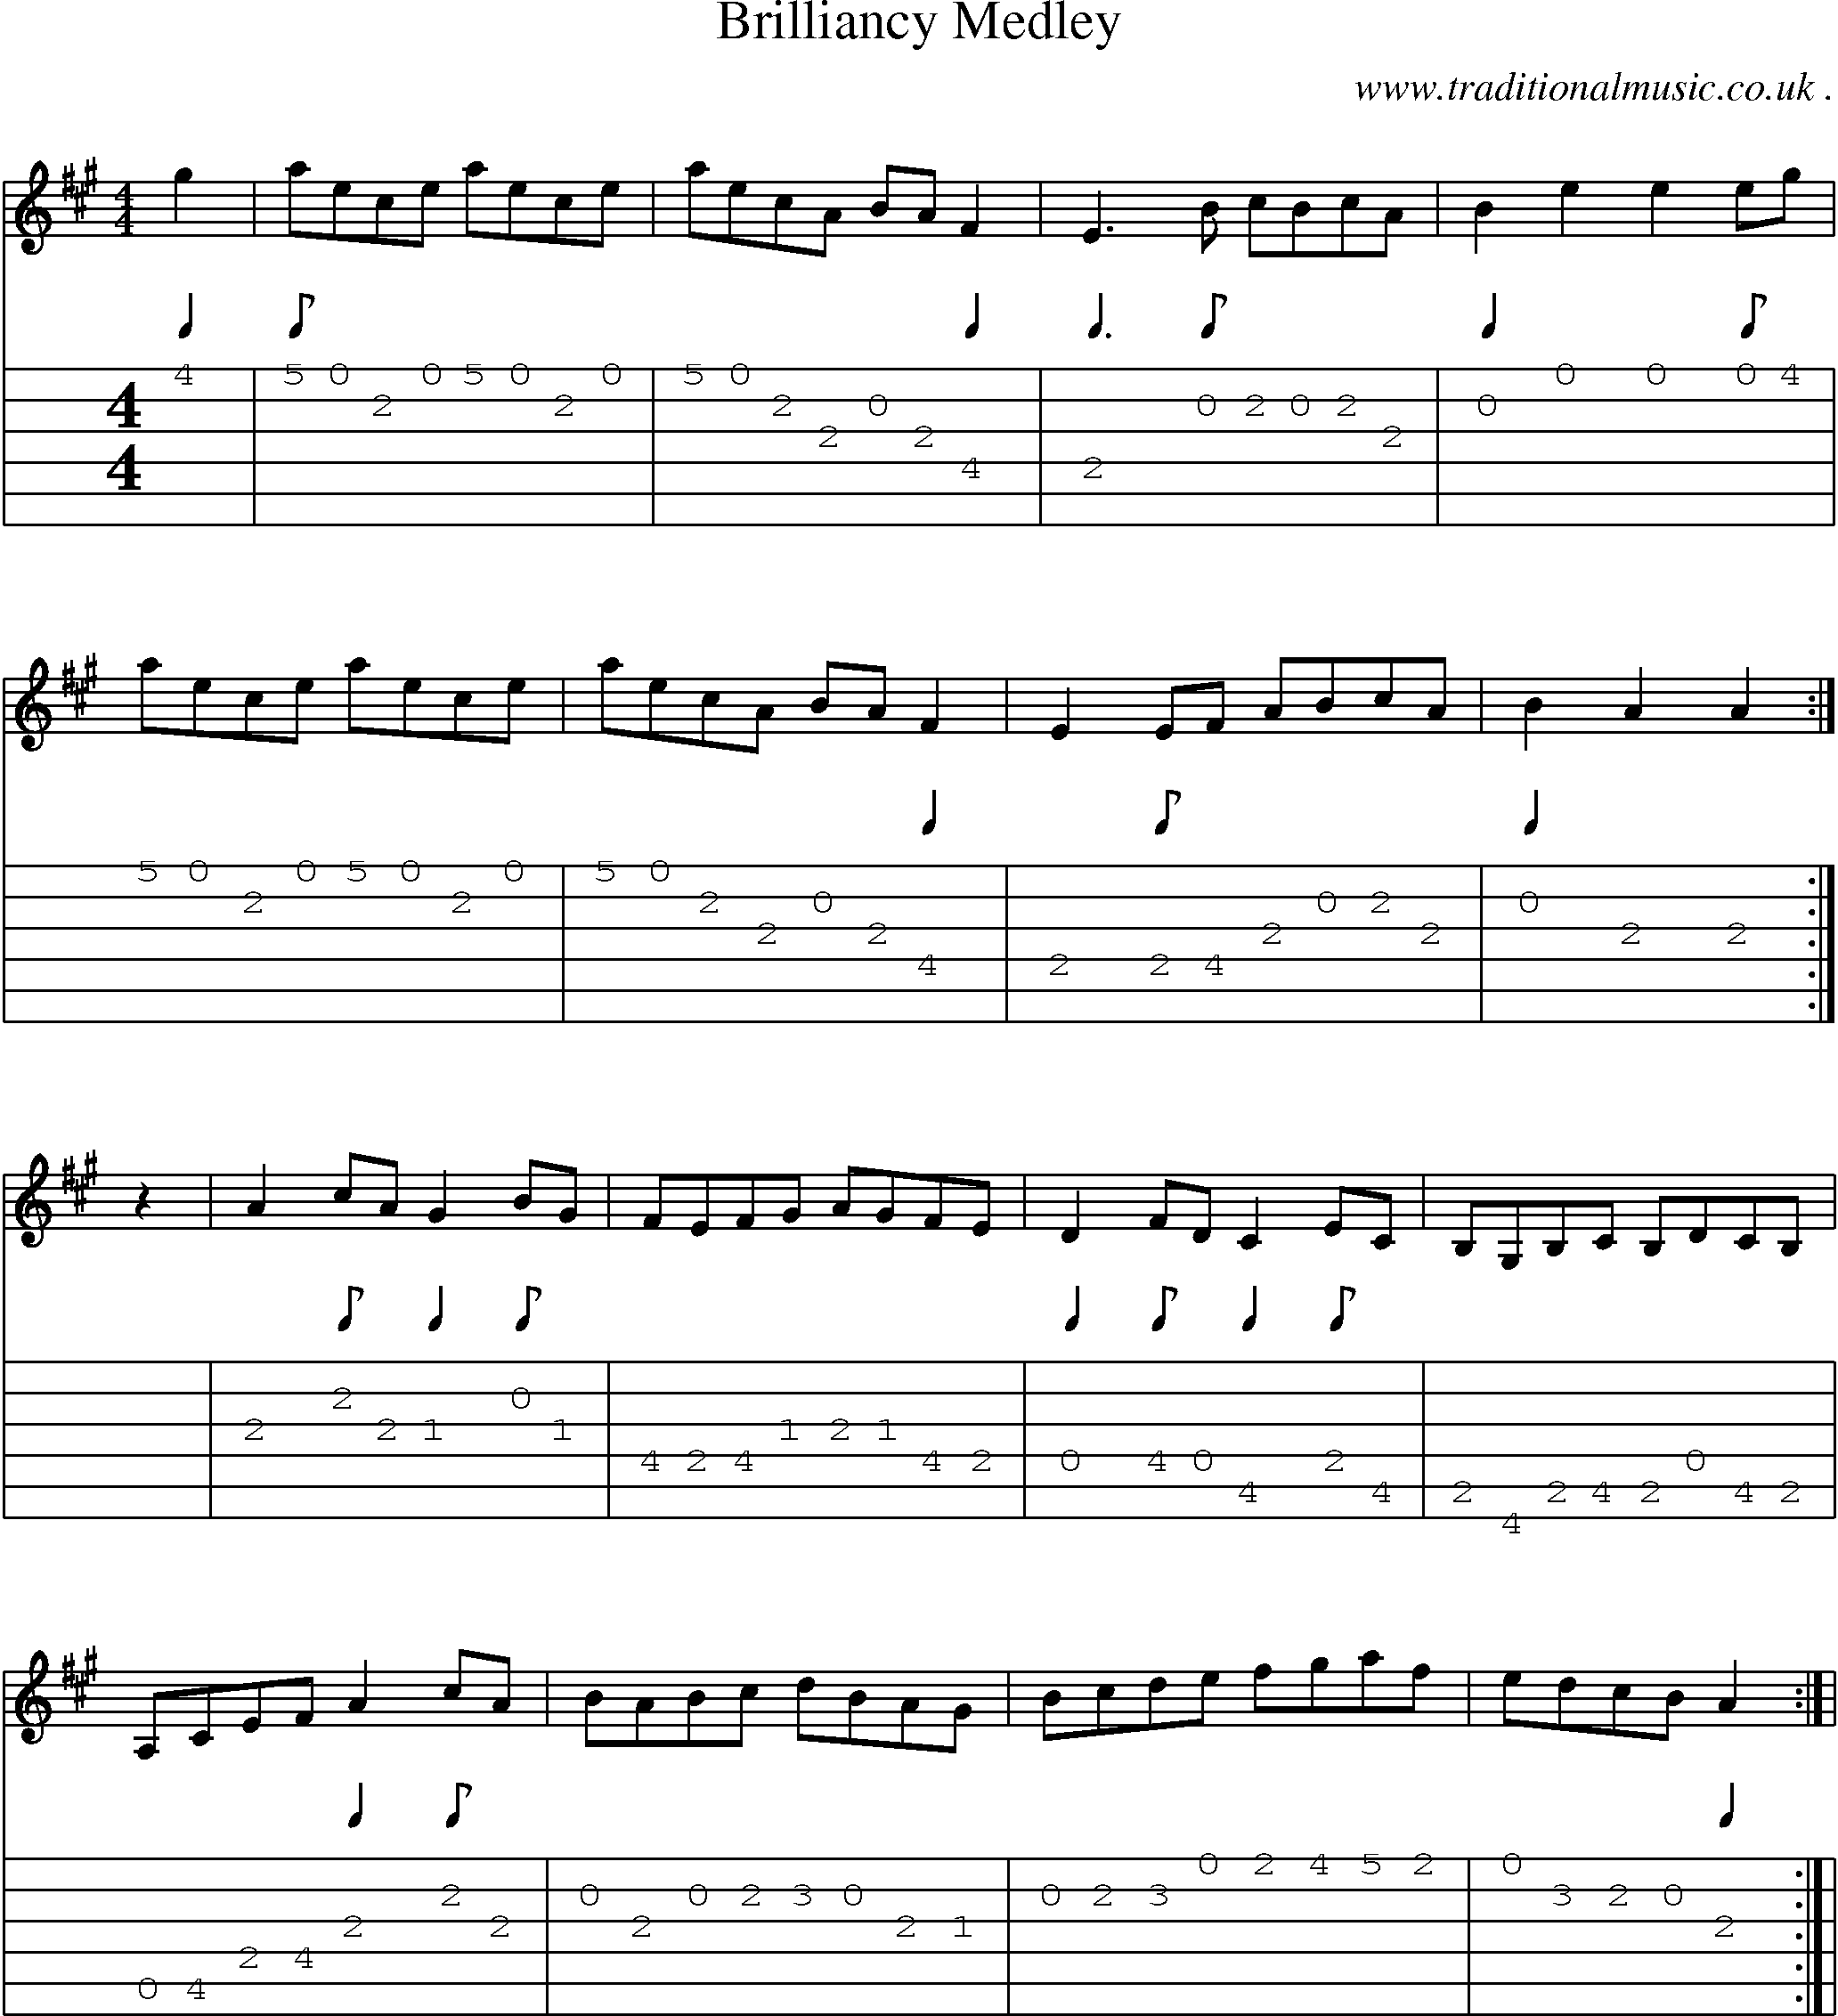 Music Score and Guitar Tabs for Brilliancy Medley